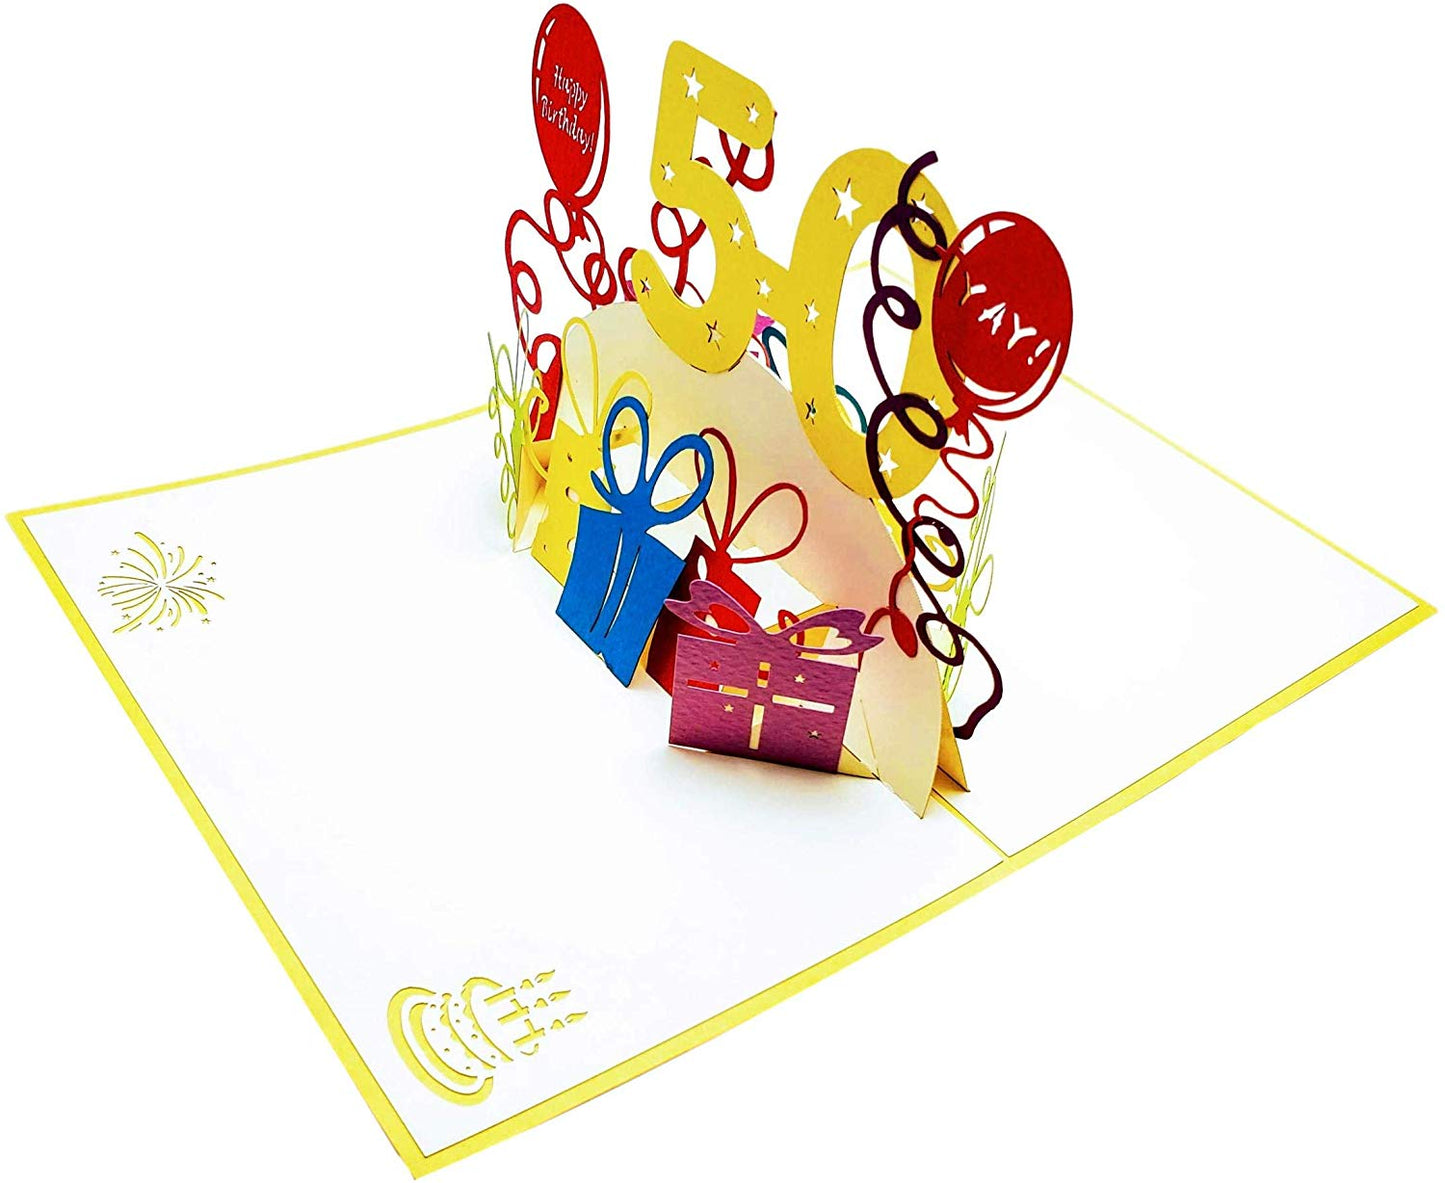 Happy 50th Birthday With Lots of Presents 3D Pop Up Greeting Card - Age - best deal - Birthday - iGifts And Cards